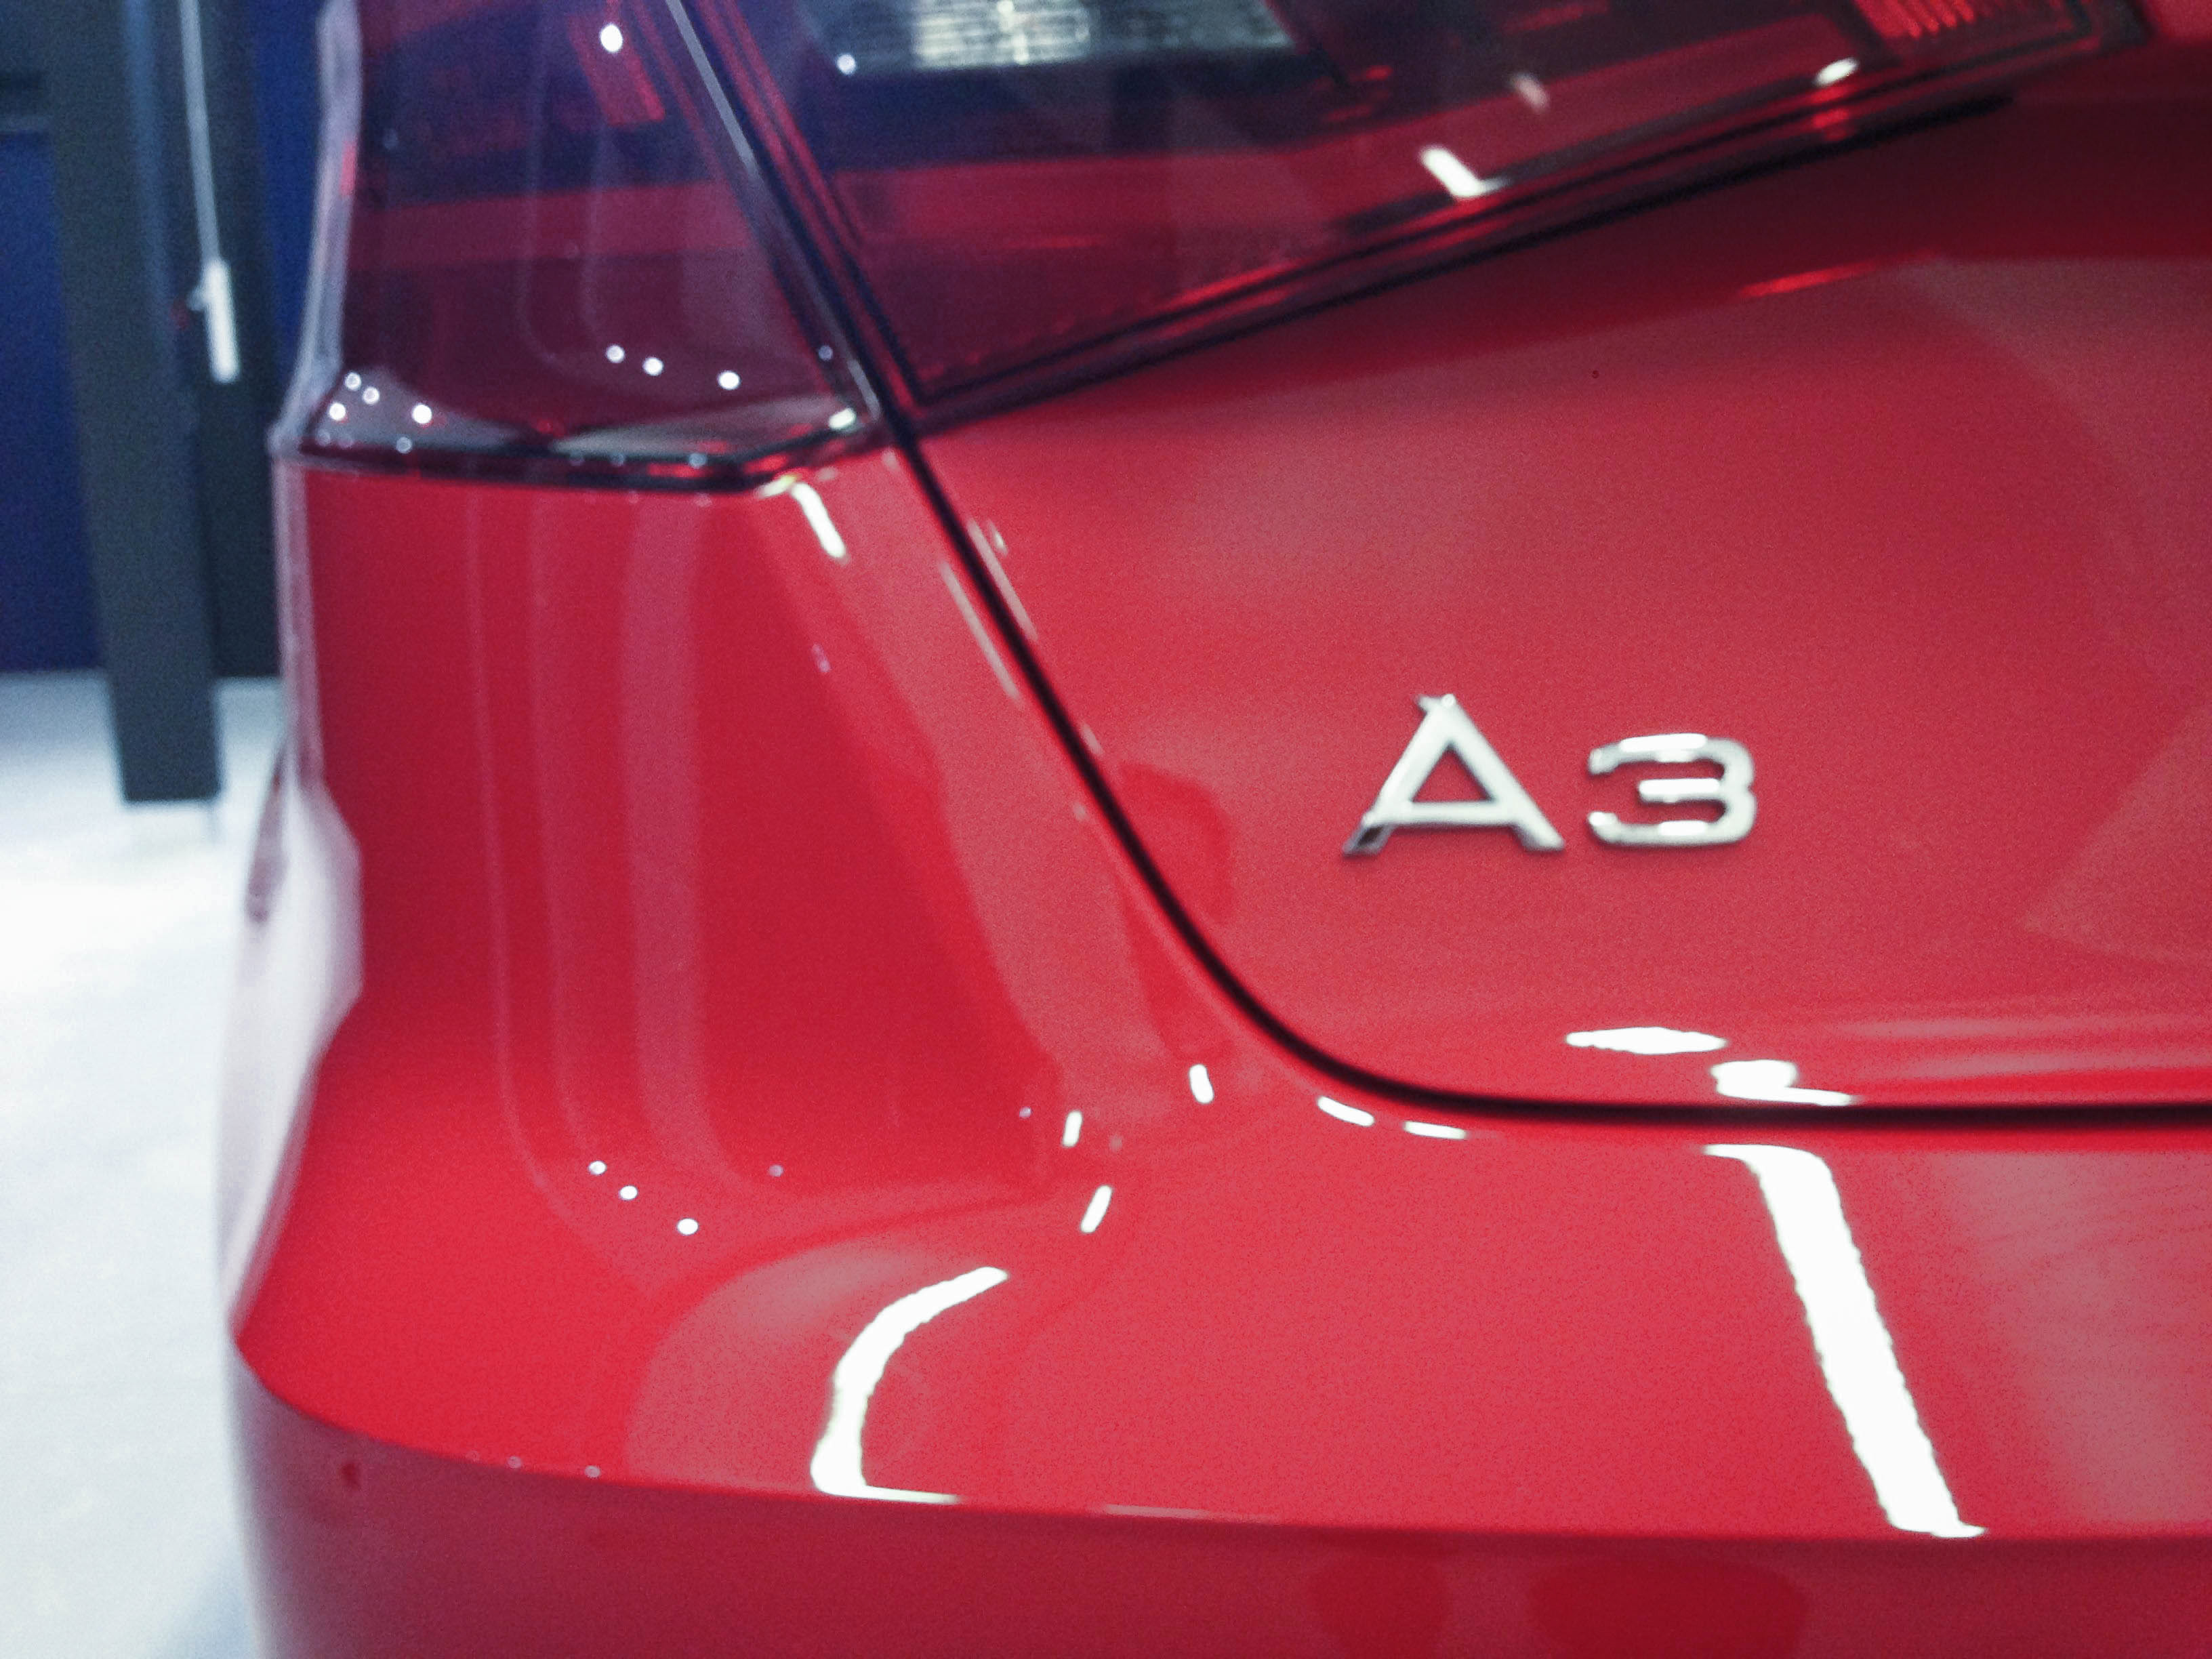 Audi A3 (Misano Red) – Rear detail